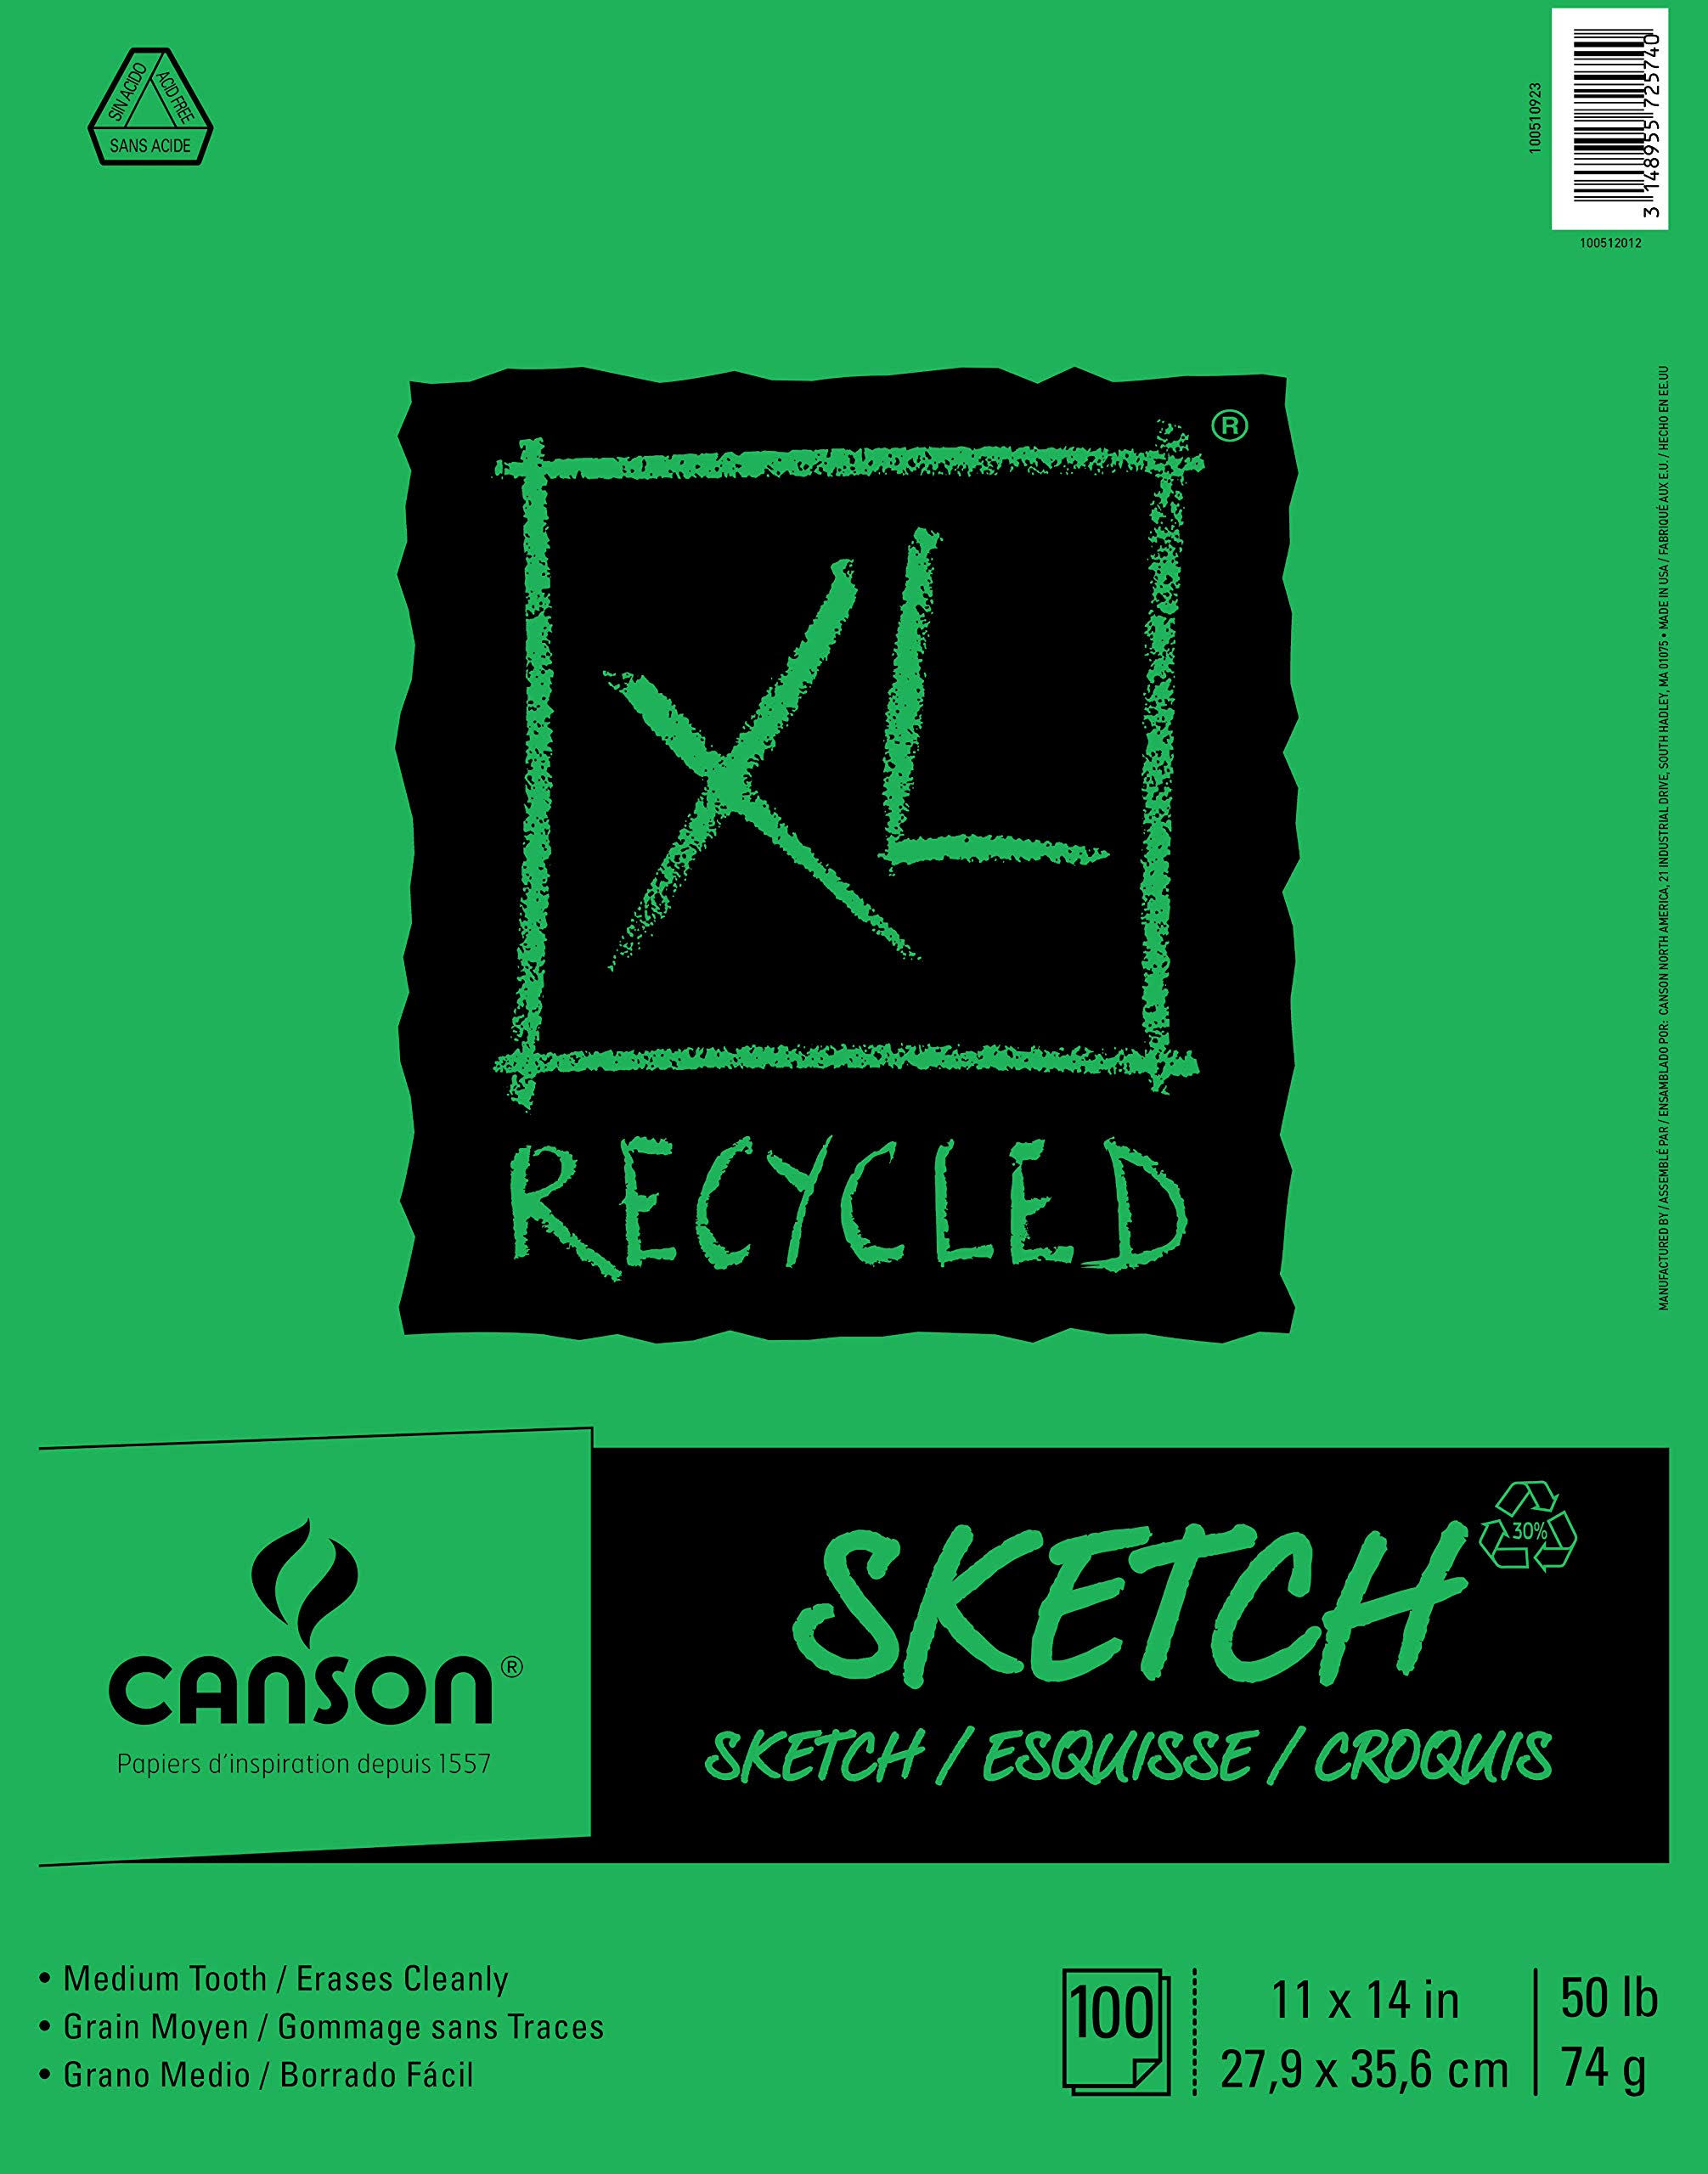 Canson Xl Recycled Sketch Pad - 11" x 14"